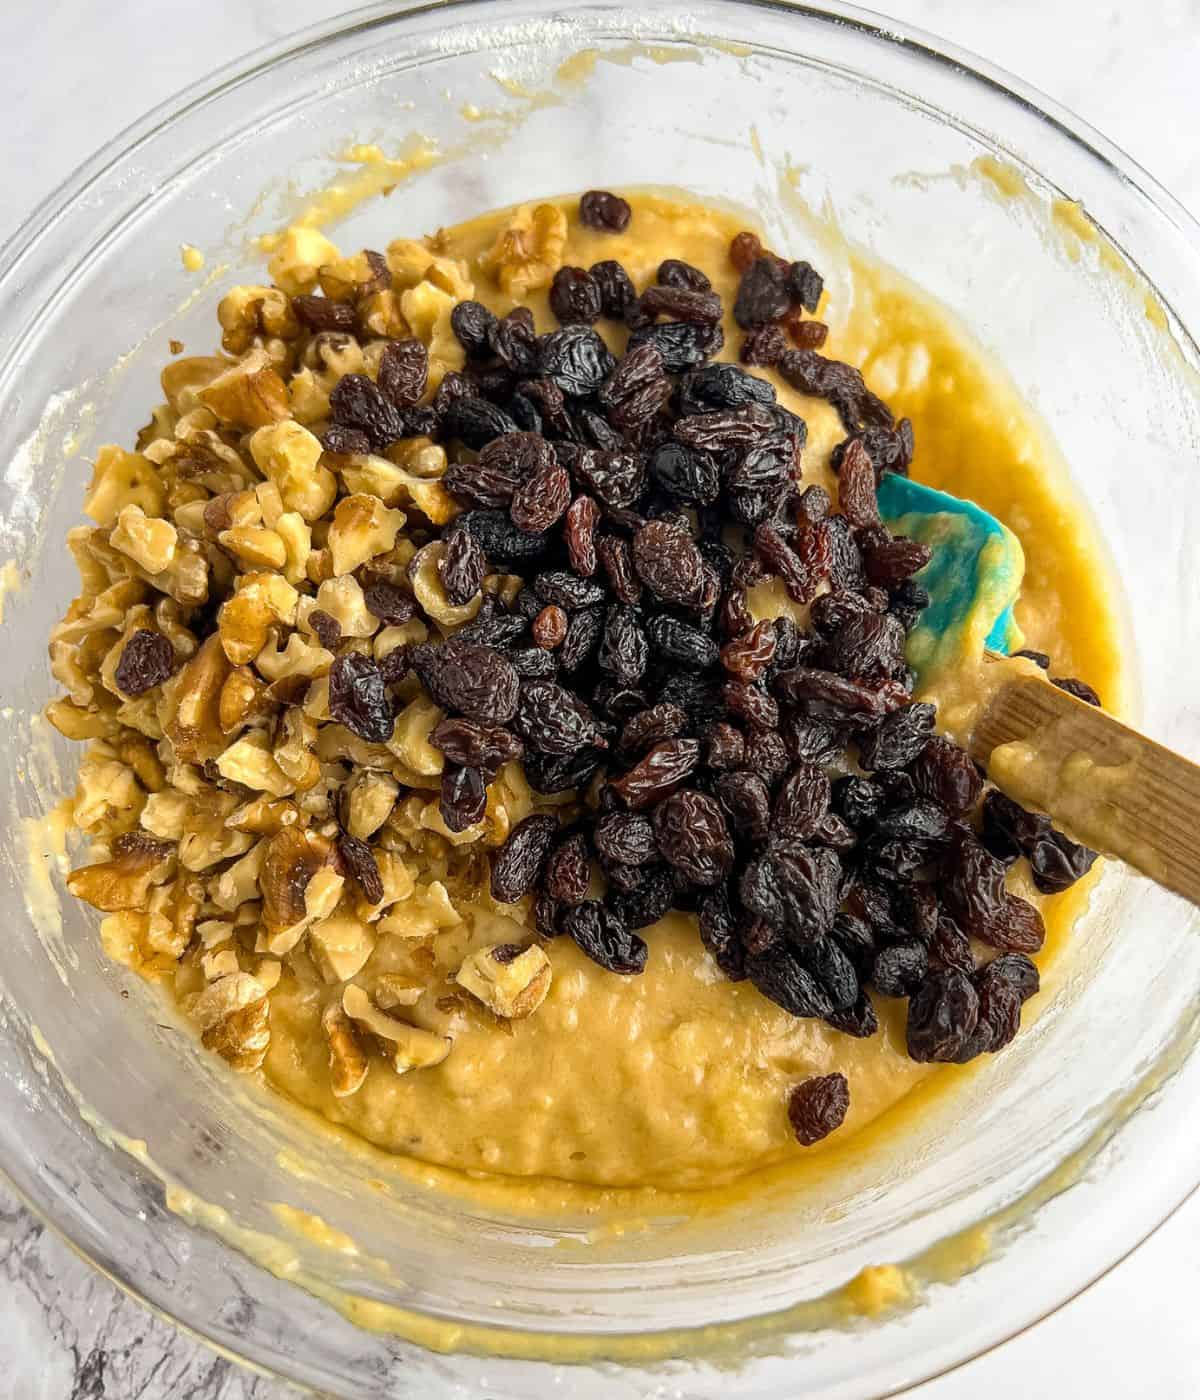 Folding in the walnuts and raisins into the batter mixture using a spatula.